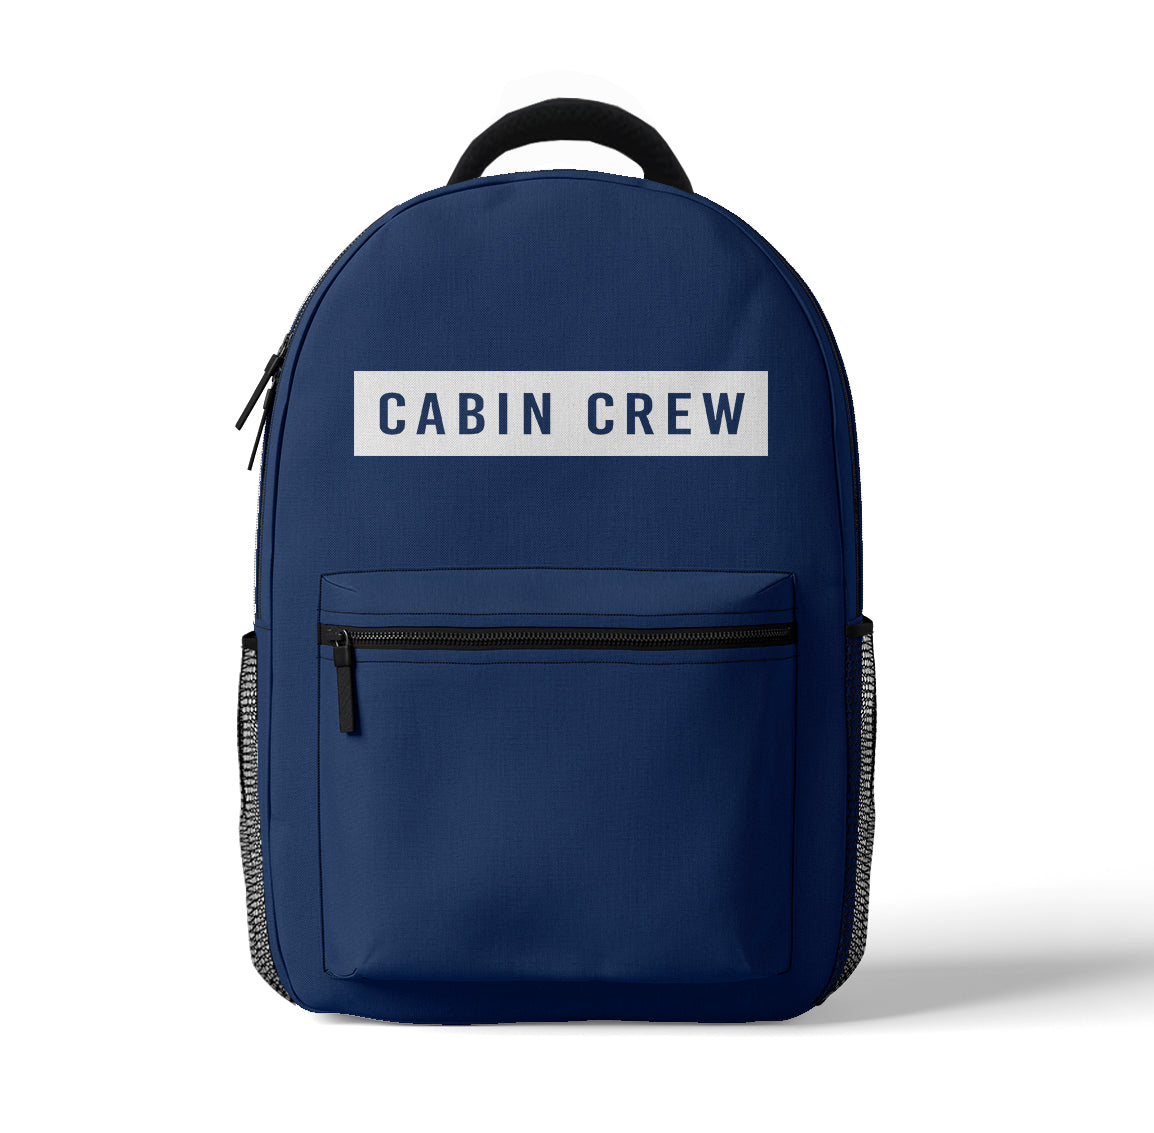 Cabin Crew Text Designed 3D Backpacks